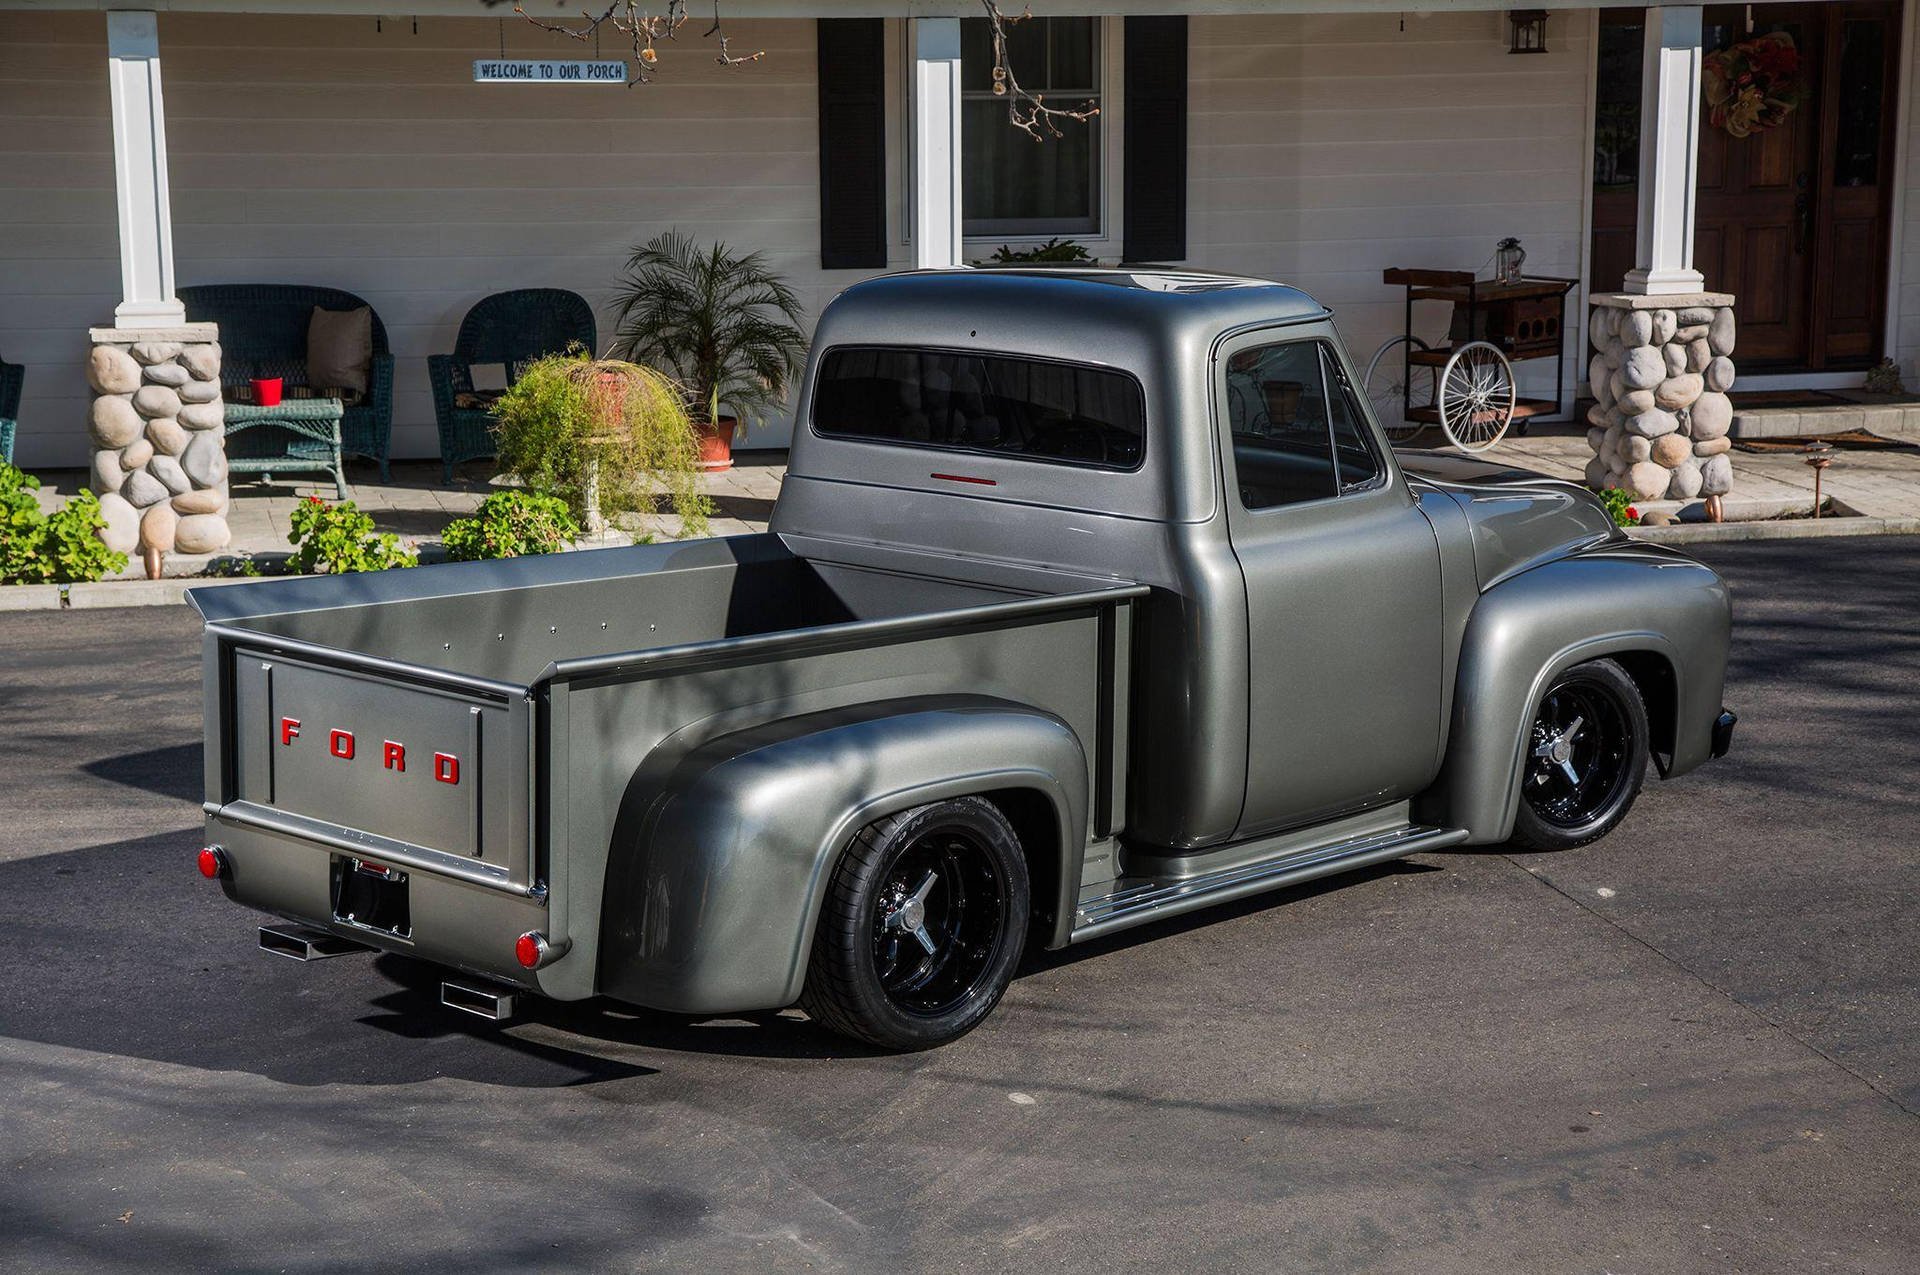 Vintage Beauty - Stunning Grey Old Ford Truck Wallpaper